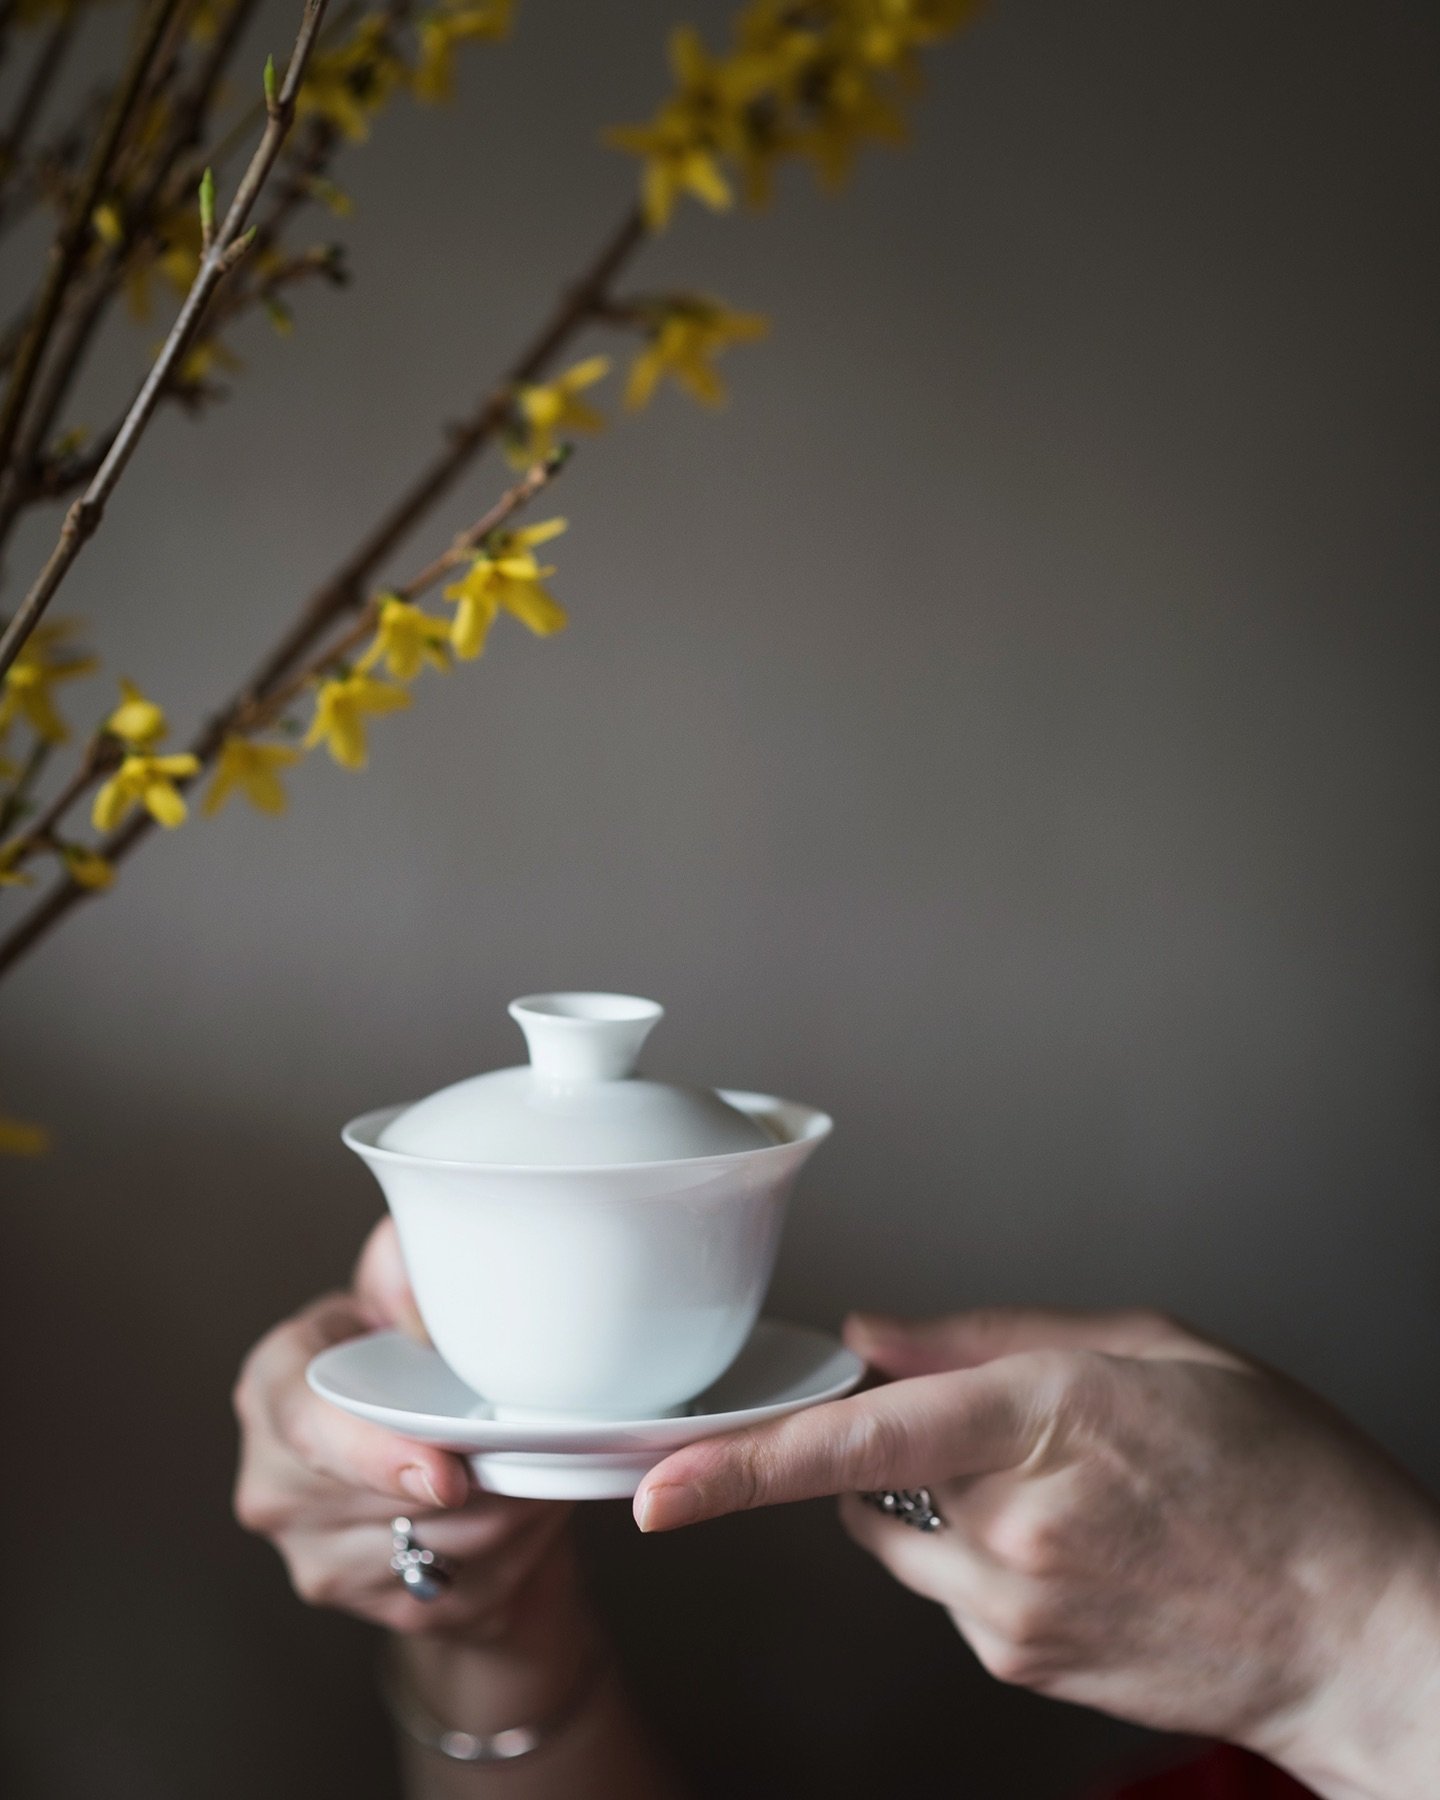 &bull;
Tea this Week:

Friday 5/10 6pm
&ldquo;Tea for the Senses&rdquo;
guided sensory experience through tea
$35

Saturday 5/11 2pm
&ldquo;Tea for Gaza&rdquo;
tea meditation and fundraiser for Palestinian artists
$ by donation

Located on the Upper 